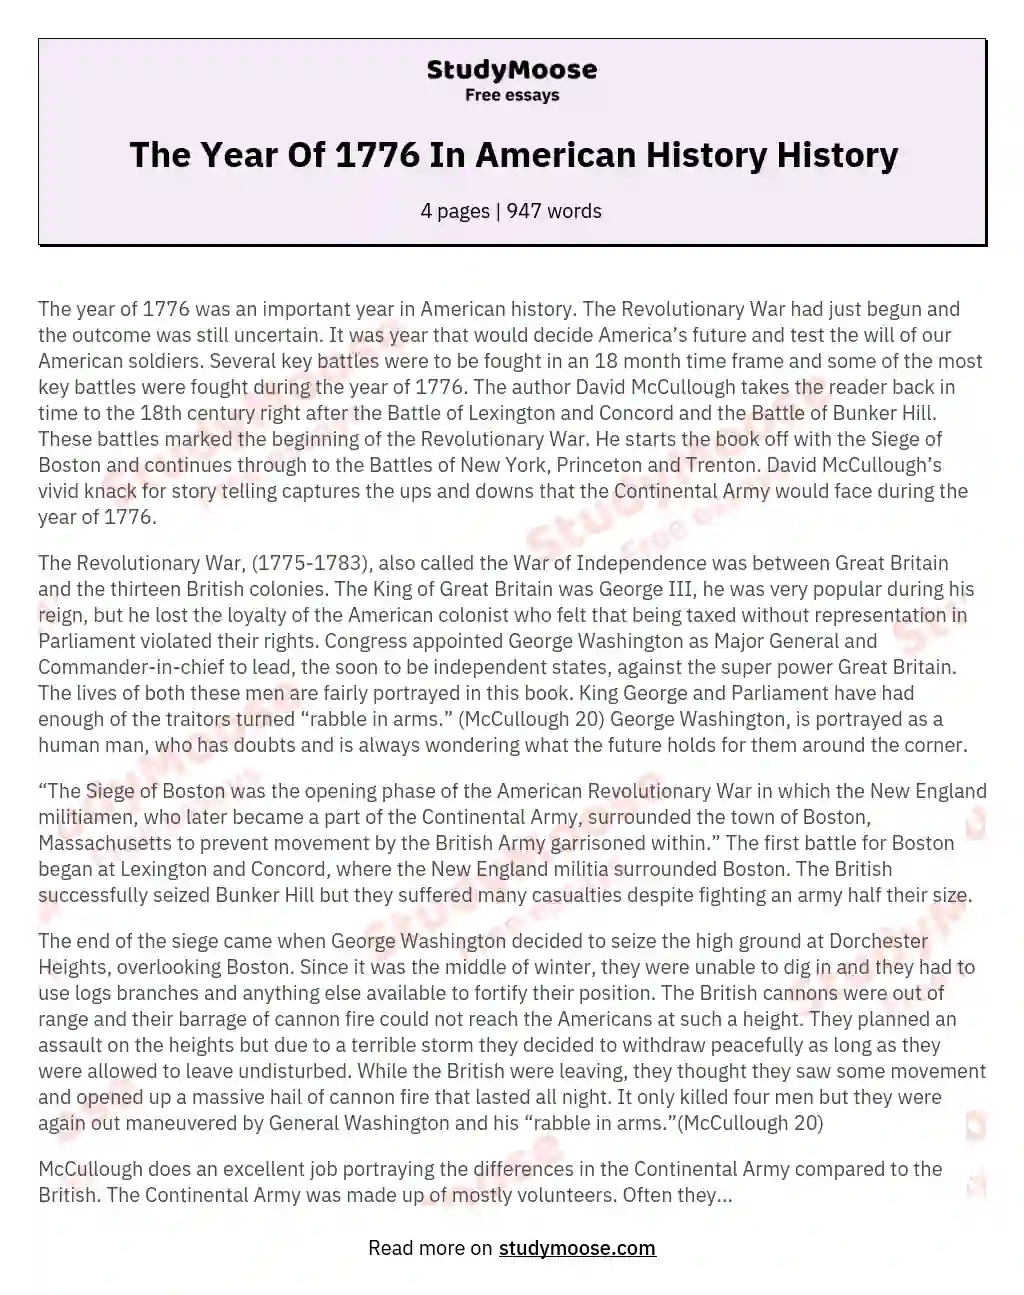 The Year Of 1776 In American History History